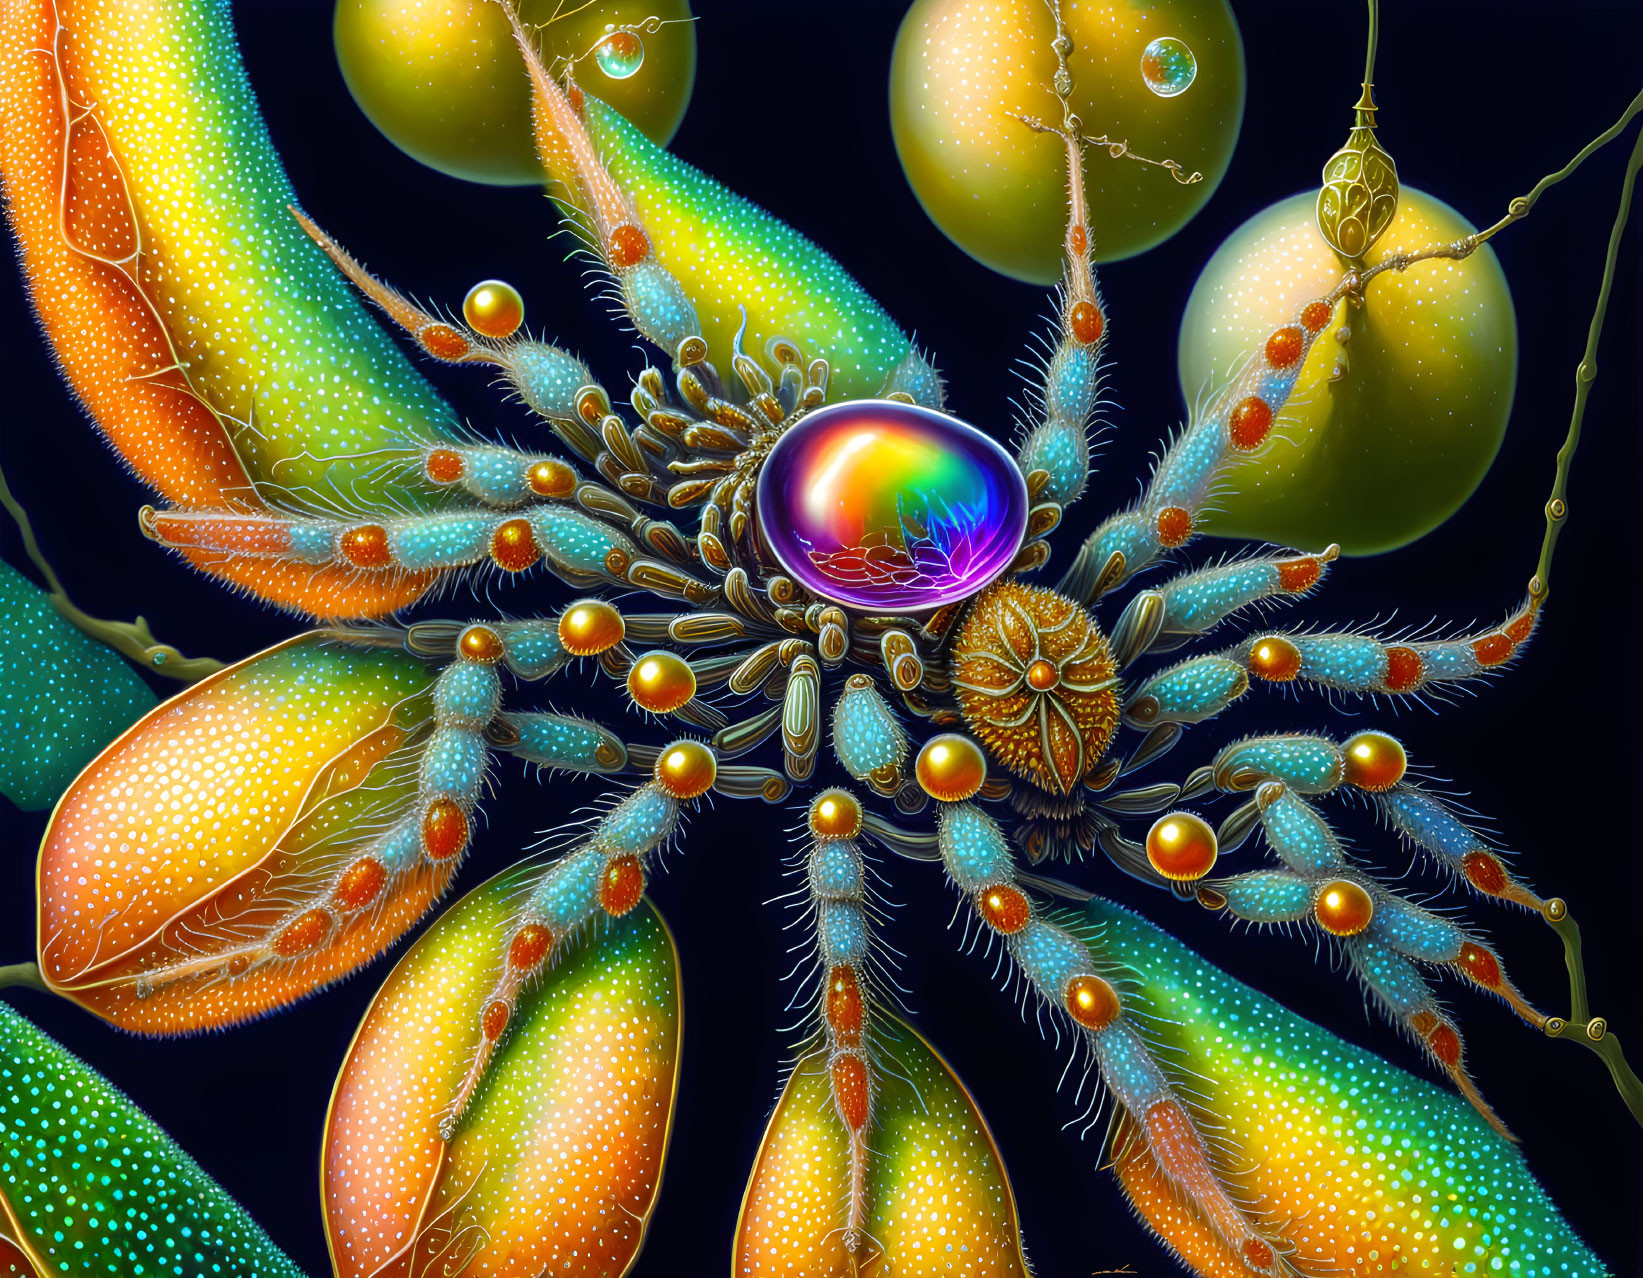 Colorful Fantastical Creature with Intricate Details and Multiple Limbs